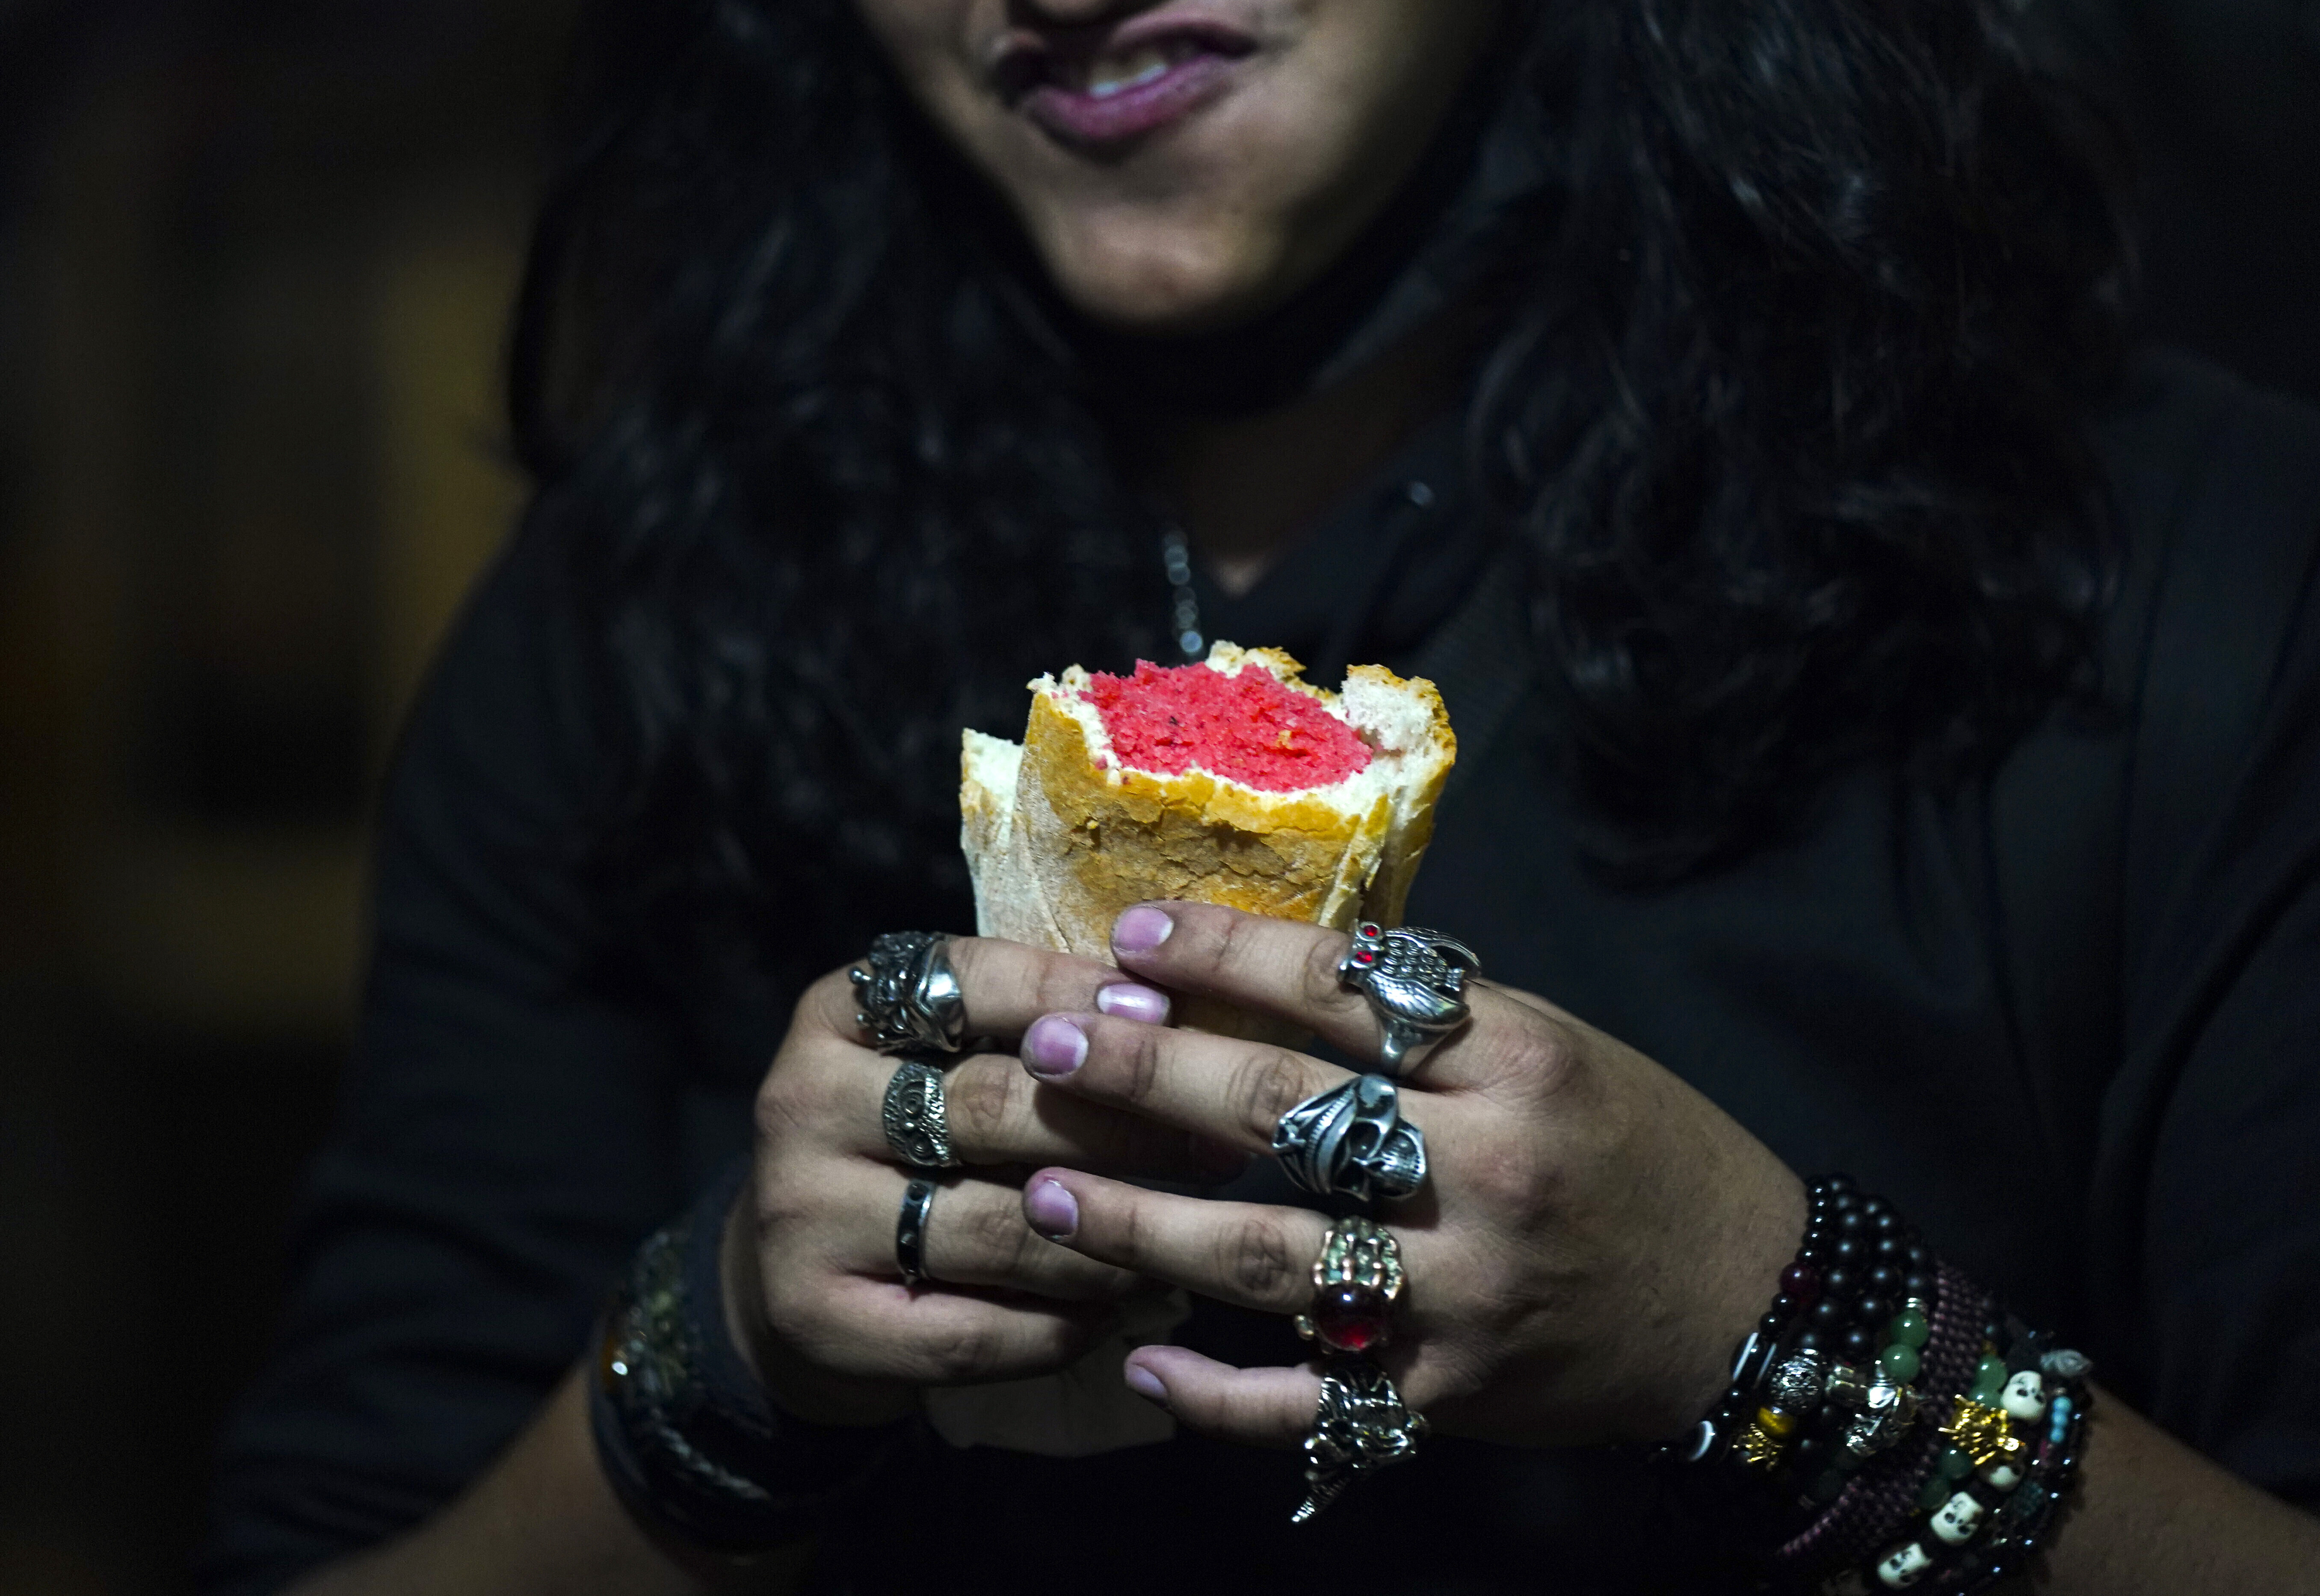 A young man who plays guitar in a rock band eats a pink tamale before a concert, at a street tamale stand in downtown Mexico City, on January 26, 2023. The dish dates back to pre-Hispanic times. when the Olmecs, Mexicas and Mayans used it in religious rituals, offerings and tombs.  (AP Photo/Fernando Llano)